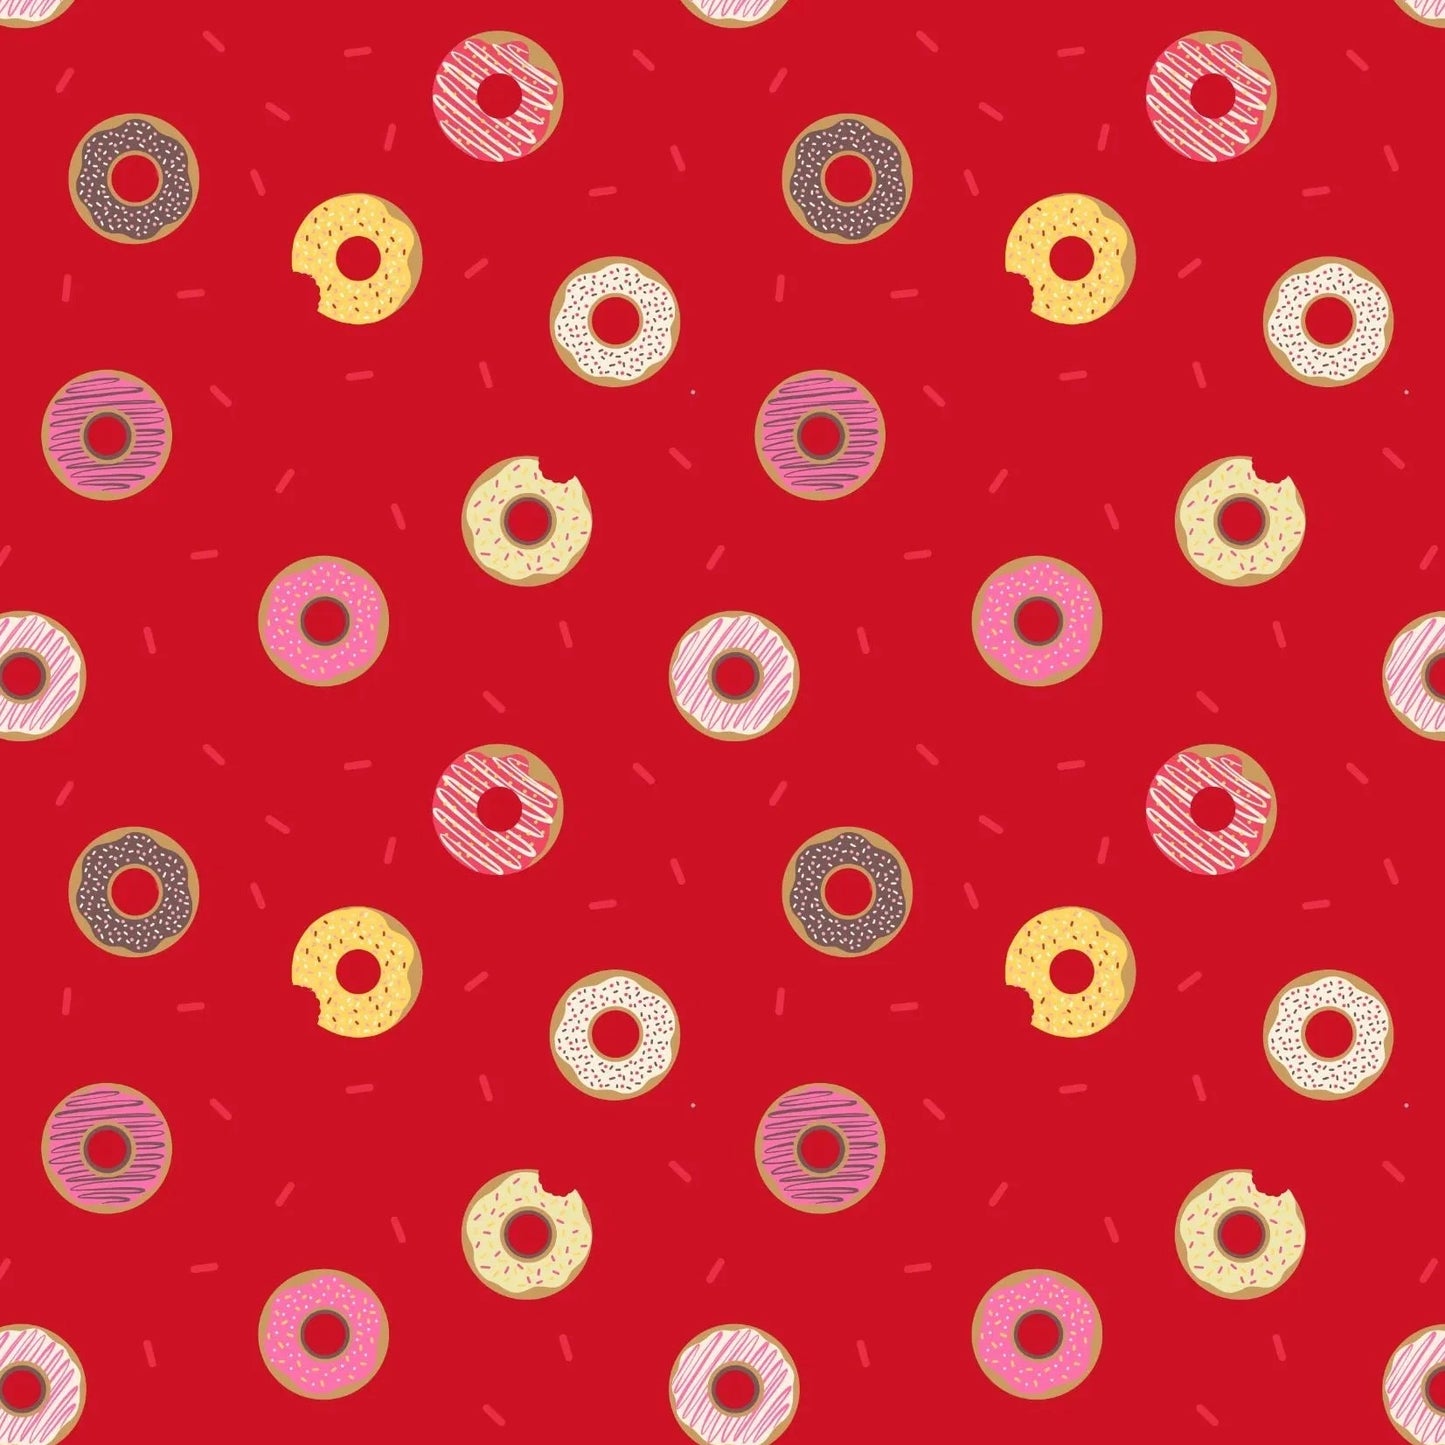 Doughnuts On Red Quilting Fabric